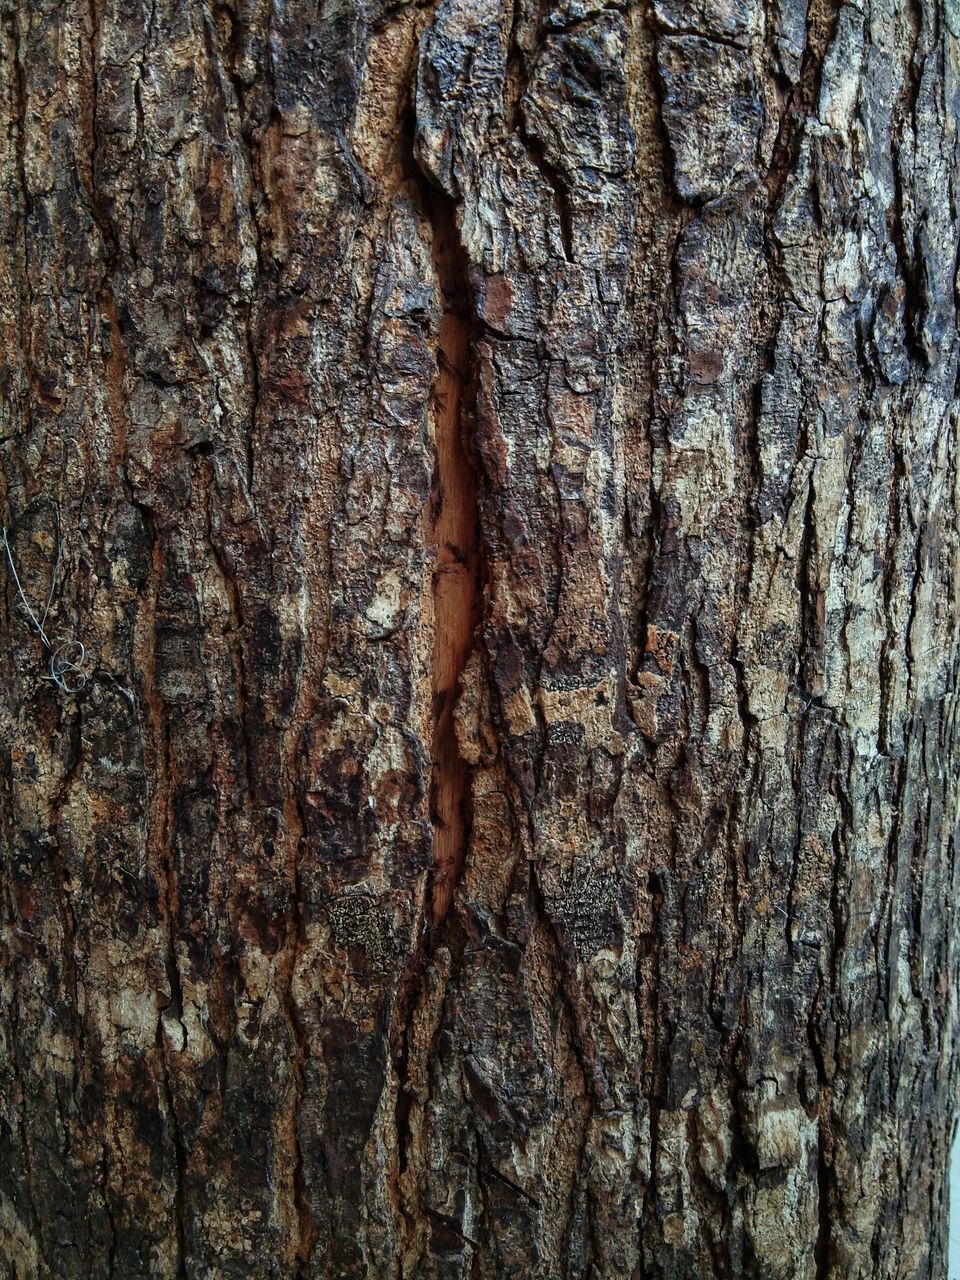 CLOSE-UP OF TREE TRUNKS